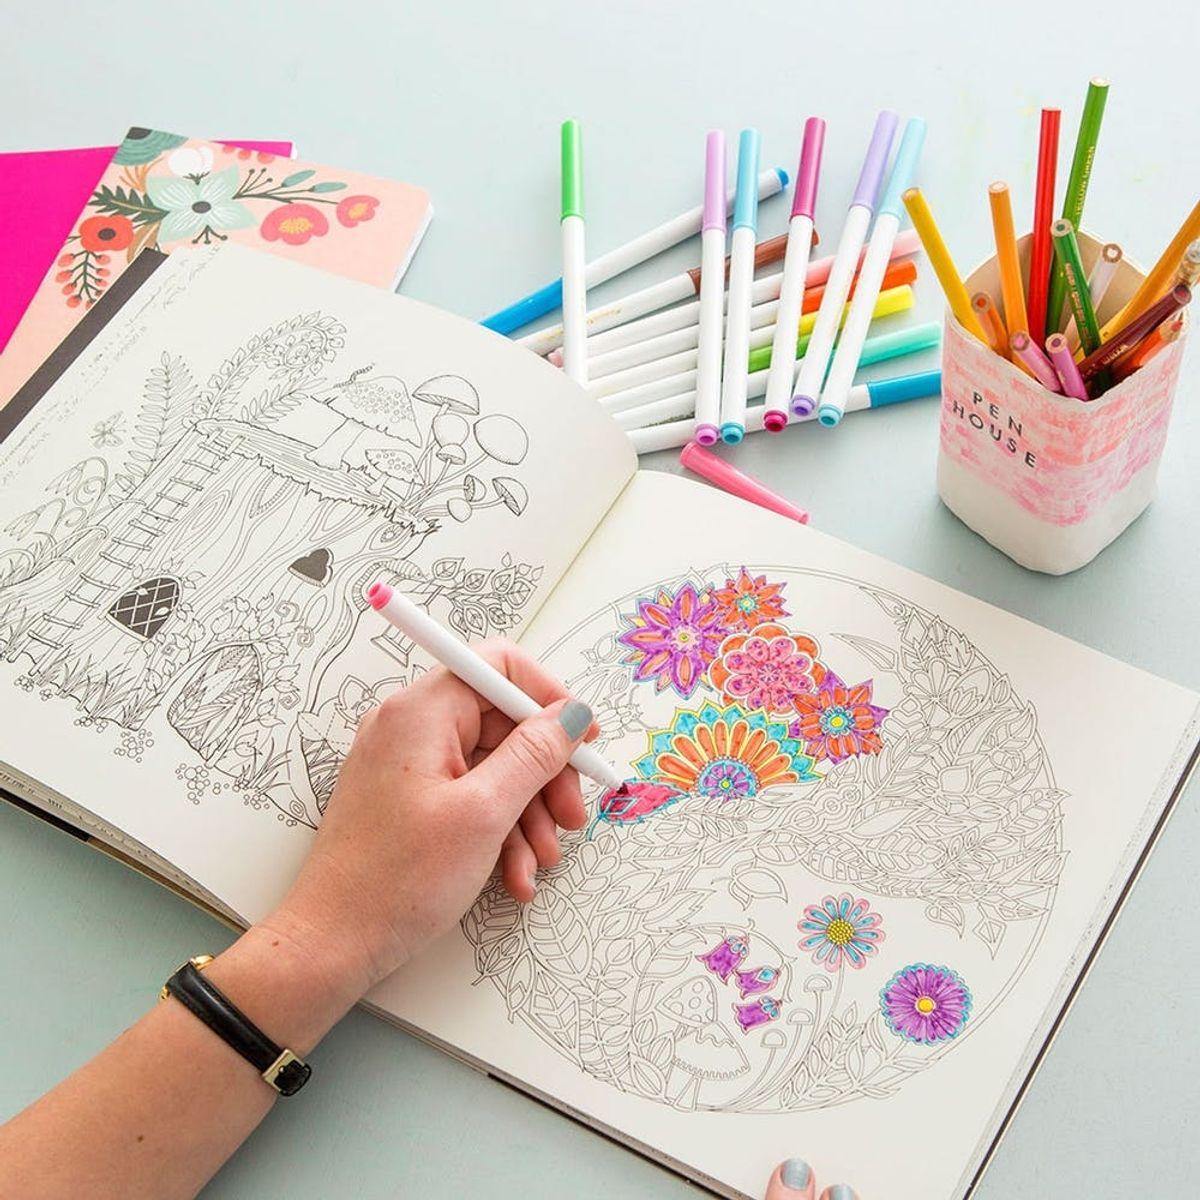 Here’s What Happens When You Color Instead of Watch TV for a Week